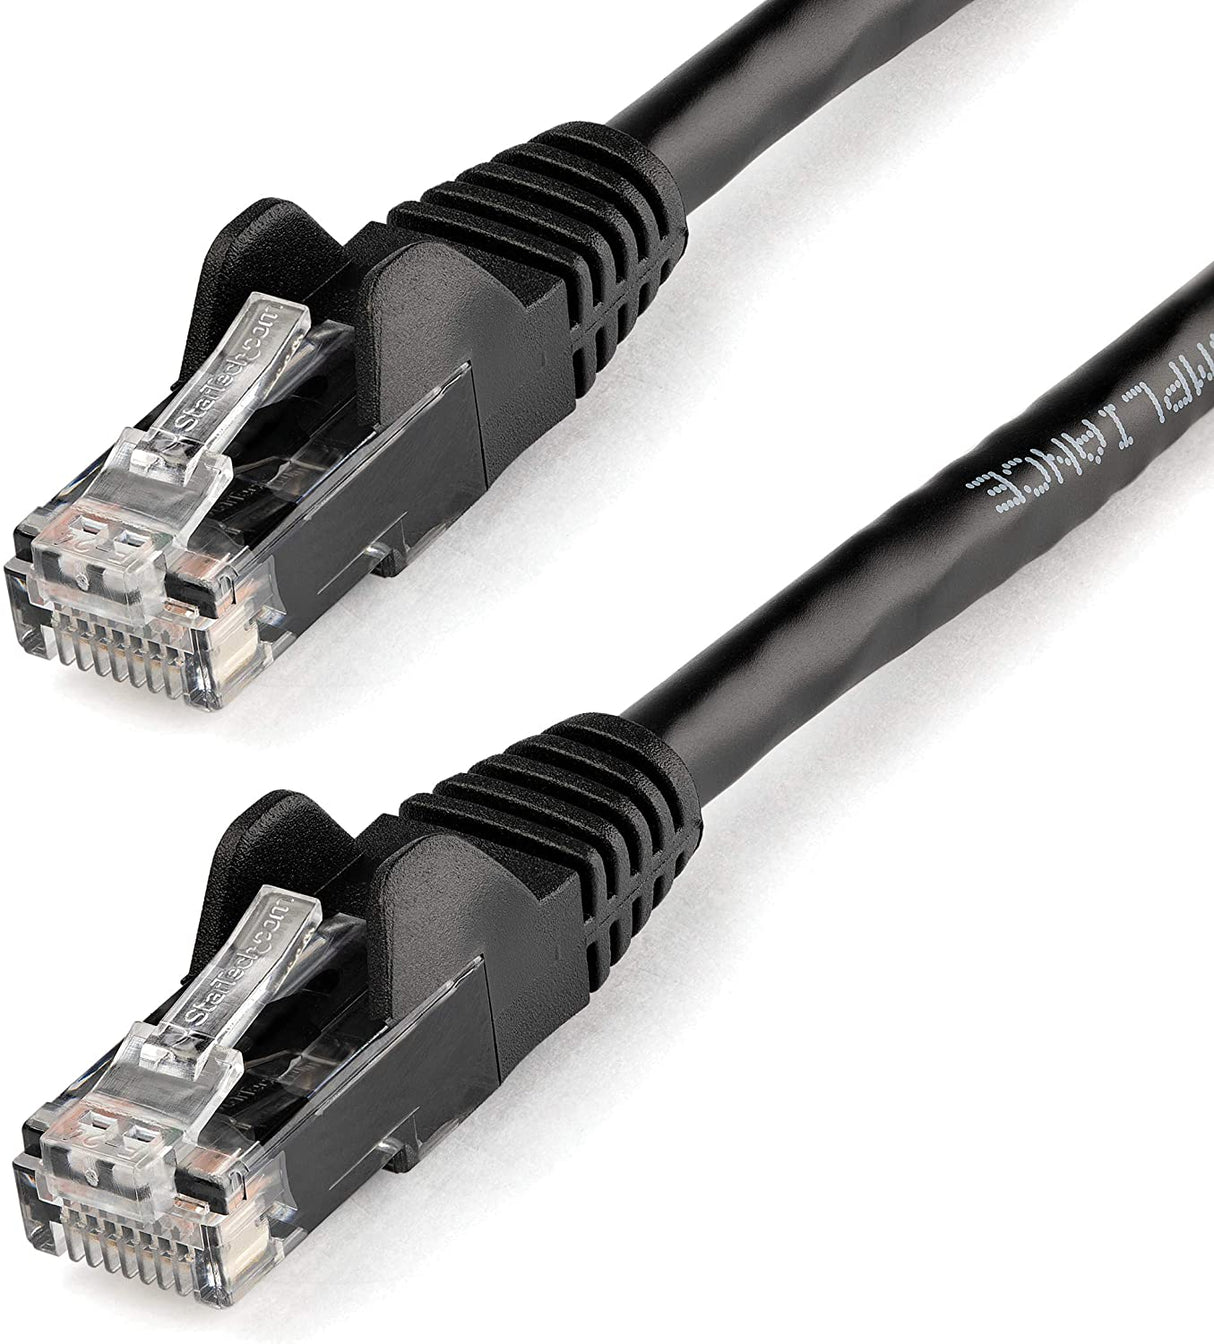 StarTech.com 2ft CAT6 Ethernet Cable - Black CAT 6 Gigabit Ethernet Wire -650MHz 100W PoE RJ45 UTP Network/Patch Cord Snagless w/Strain Relief Fluke Tested/Wiring is UL Certified/TIA (N6PATCH2BK) Black 2 ft / 0.6 m 1 Pack